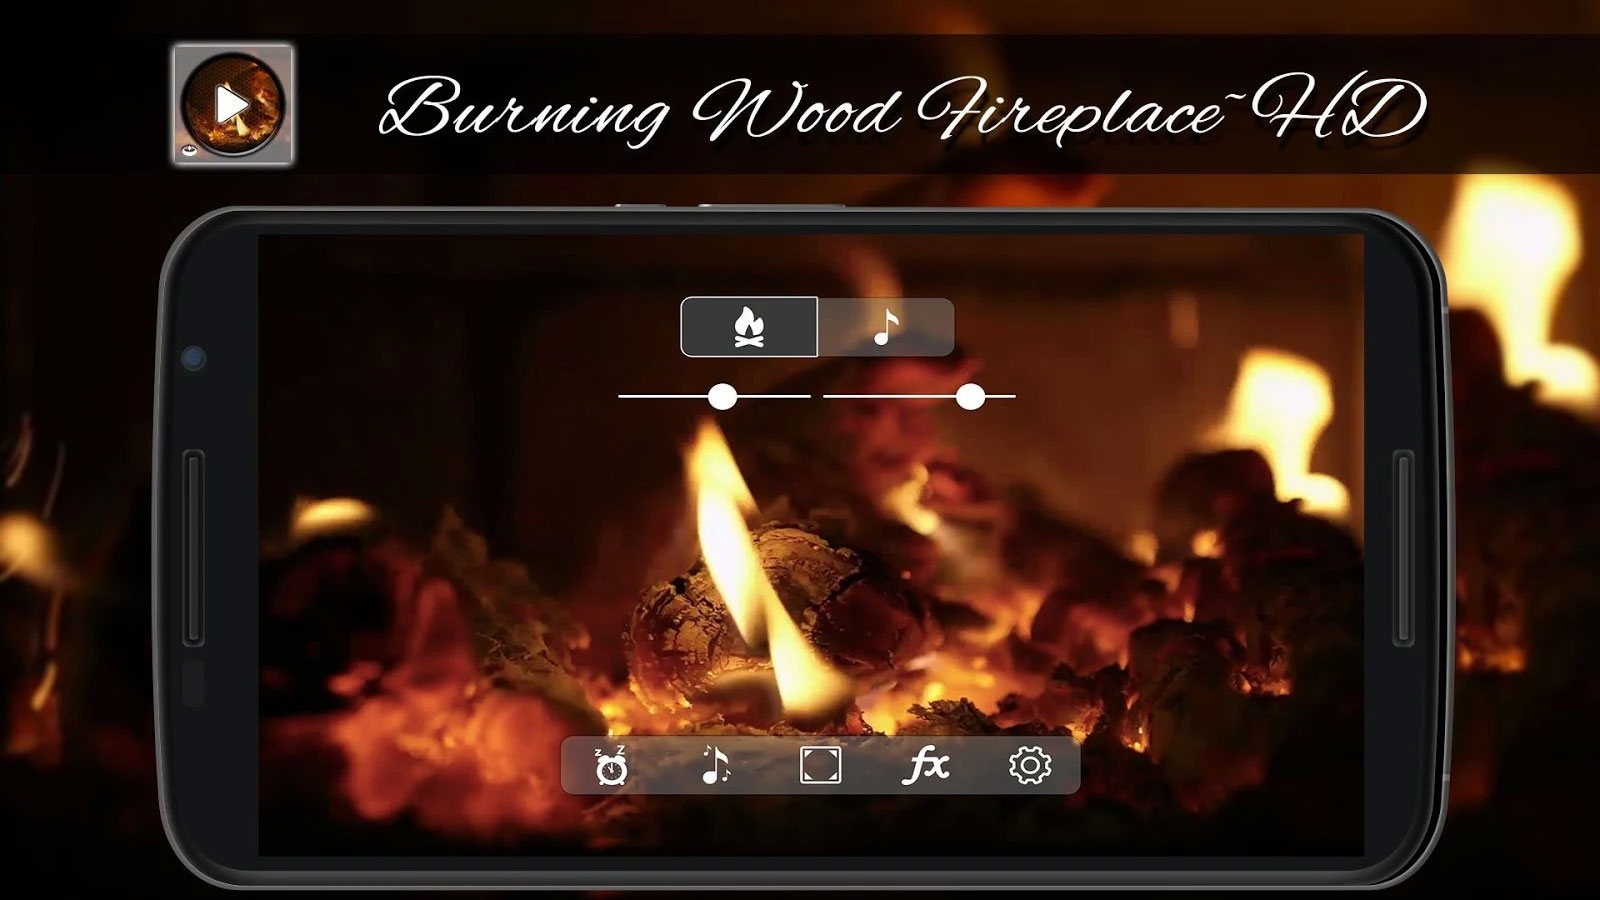 Kerst Apps Burning wood fireplace